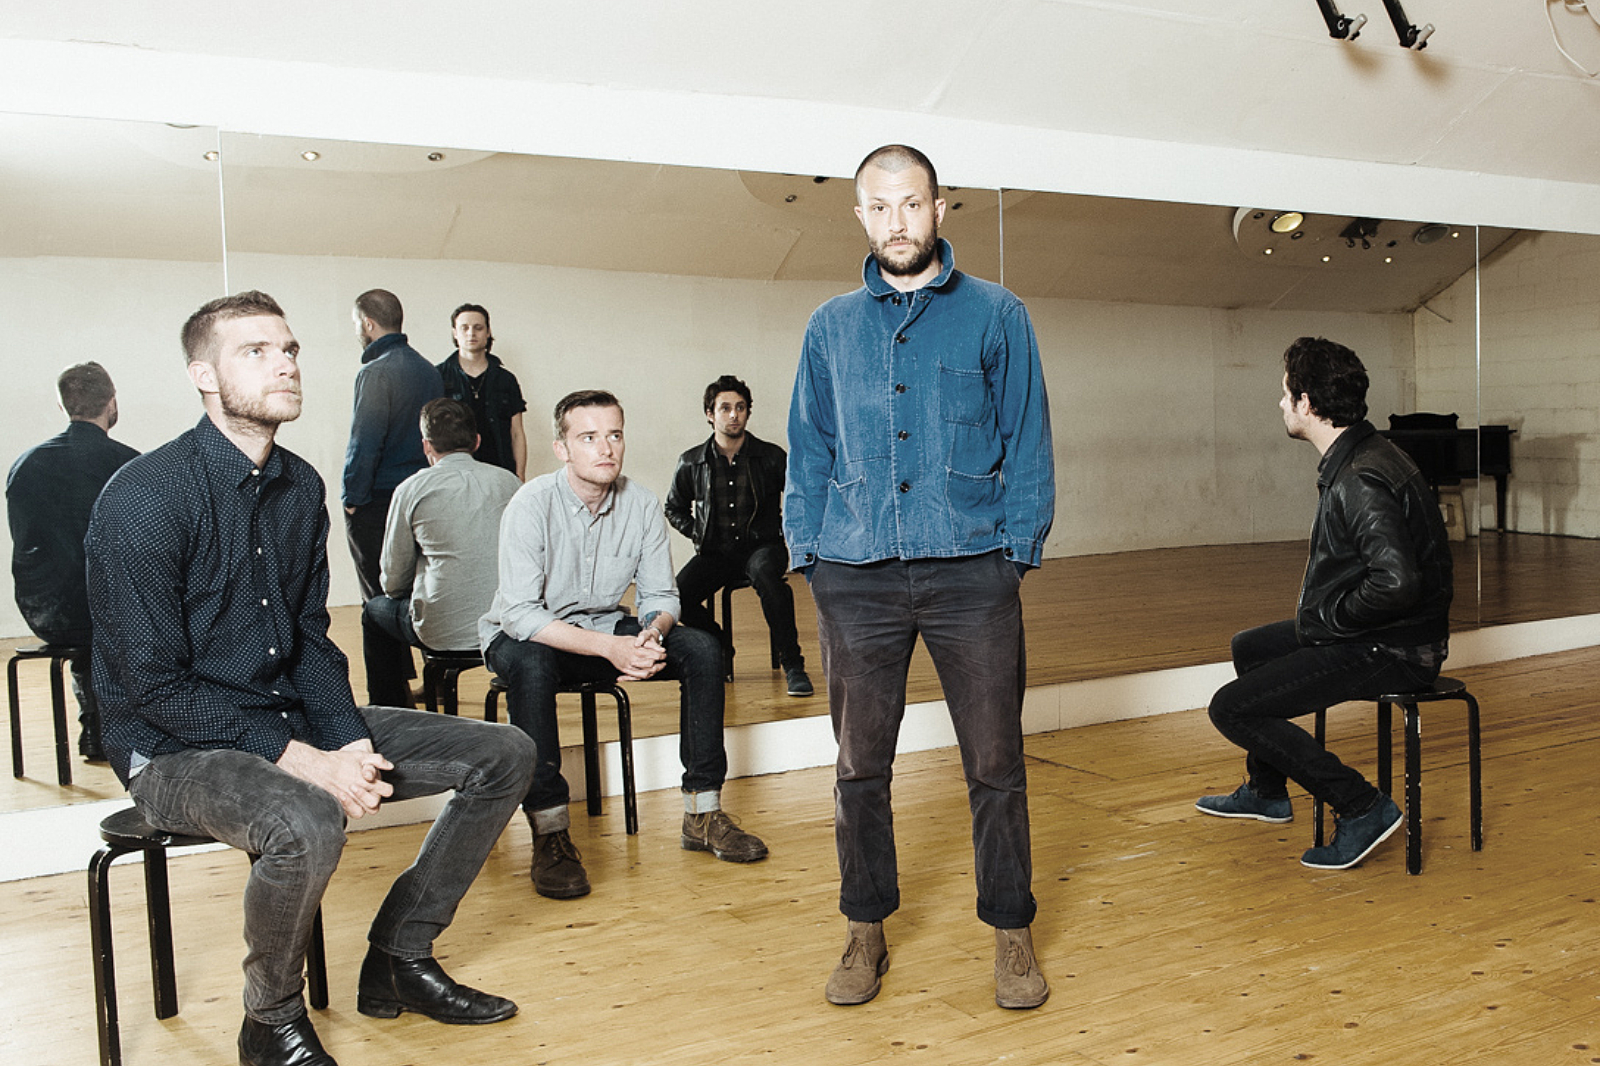 One thing's for sure, we're all getting older - The Maccabees call it quits